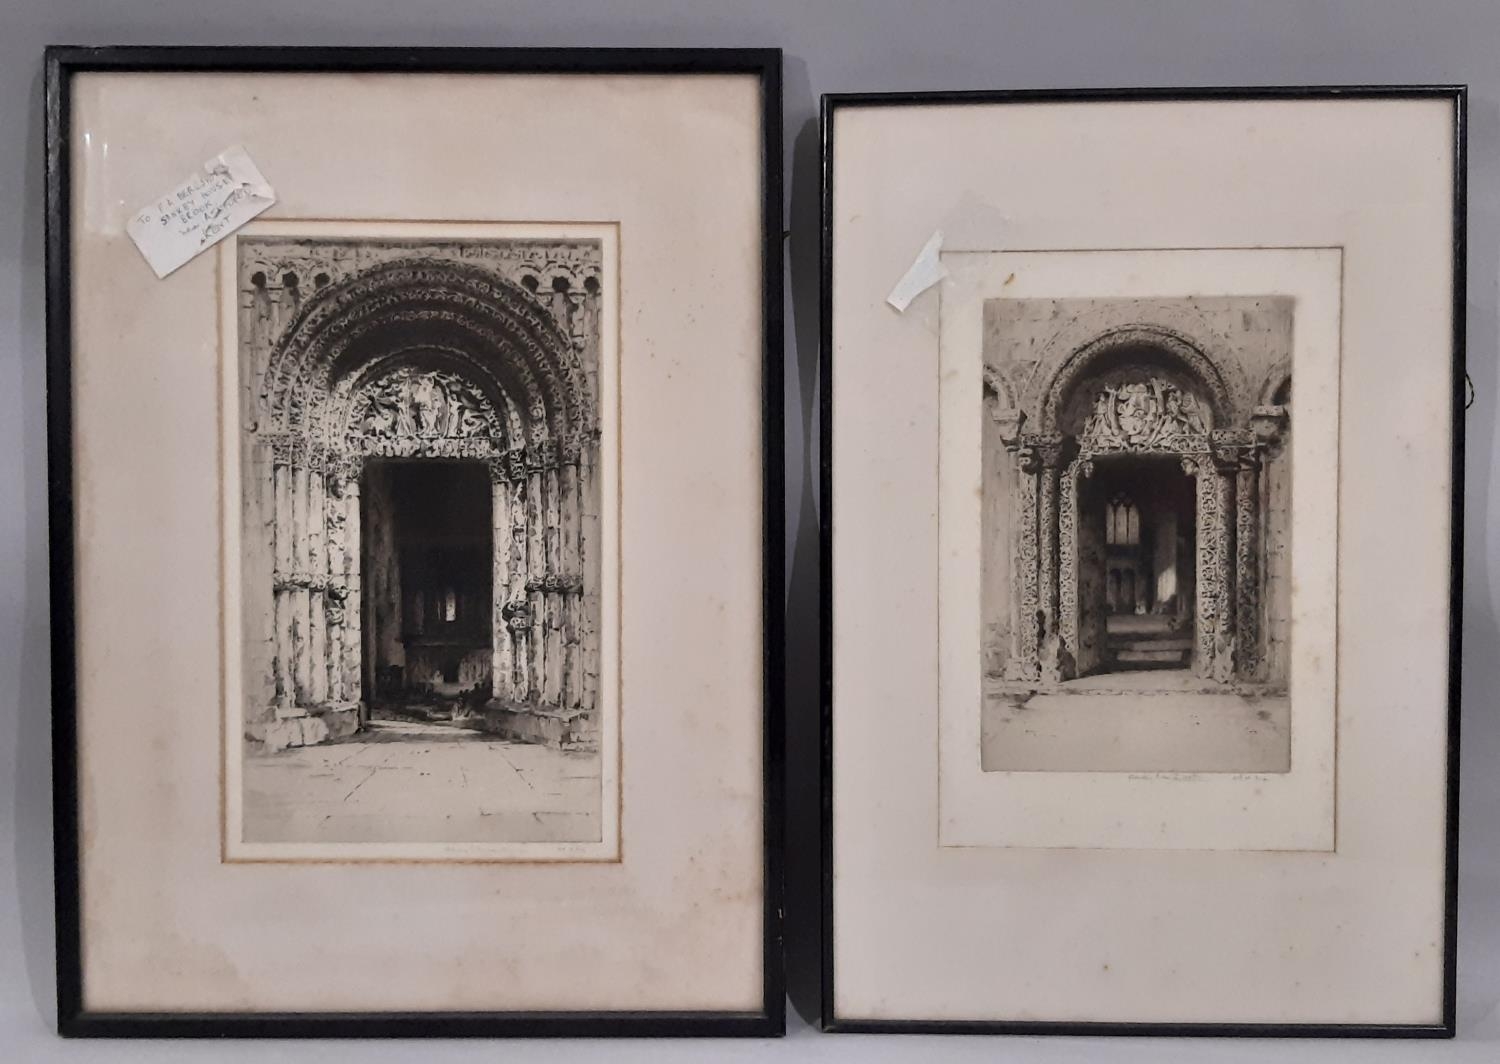 Albany E. Howarth (1872-1936) - Two etchings: 'West Door Rochester', 32 x 20 cm; 'The Prior's